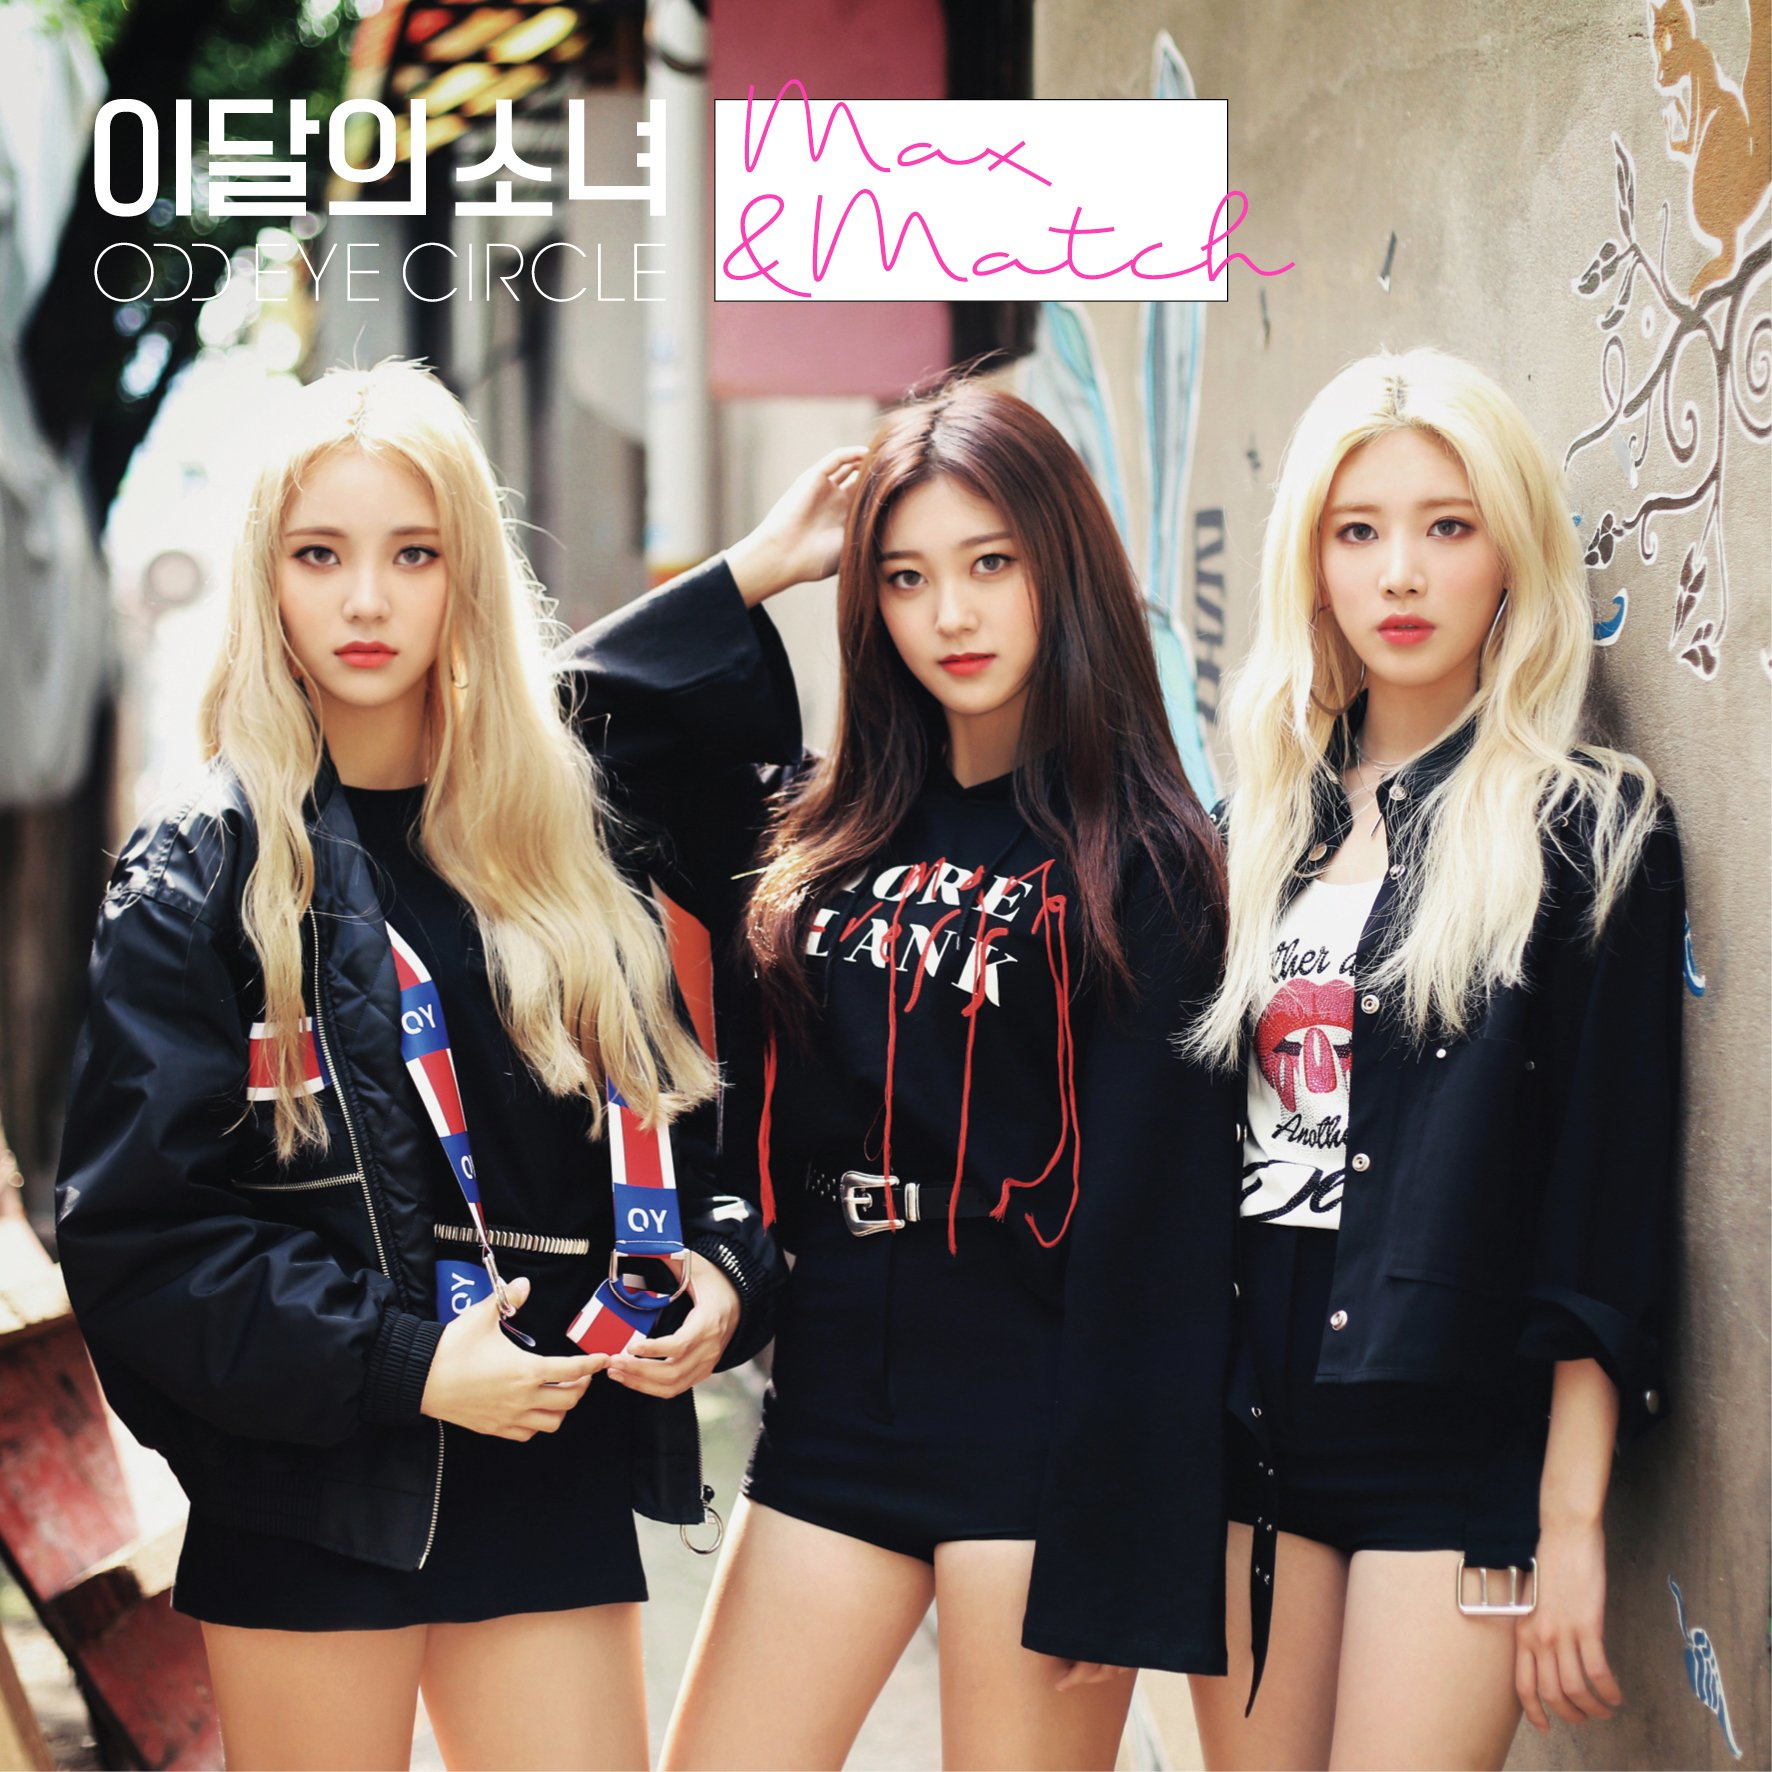 Image - ODD EYE CIRCLE Max and Match normal cover art.png | LOOΠΔ Wiki